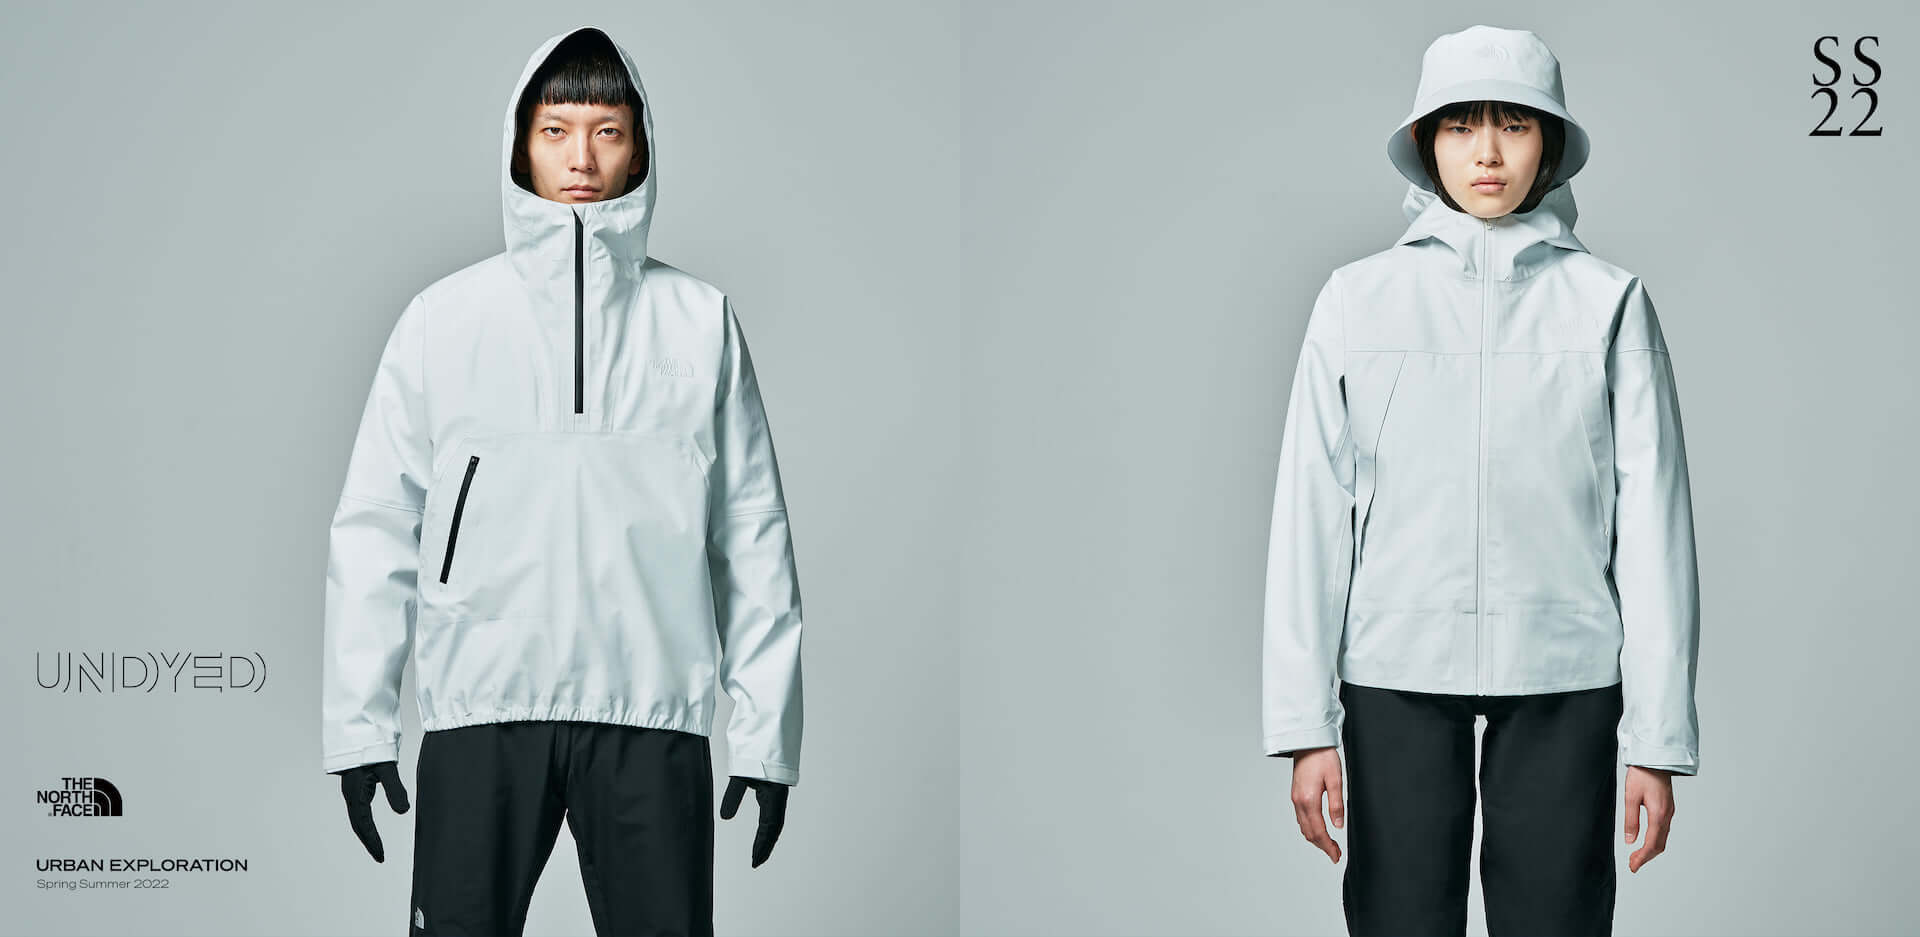 THE NORTH FACEから真っ白な「UNDYED COLLECTION」が登場―無染色技法で環境負荷を低減